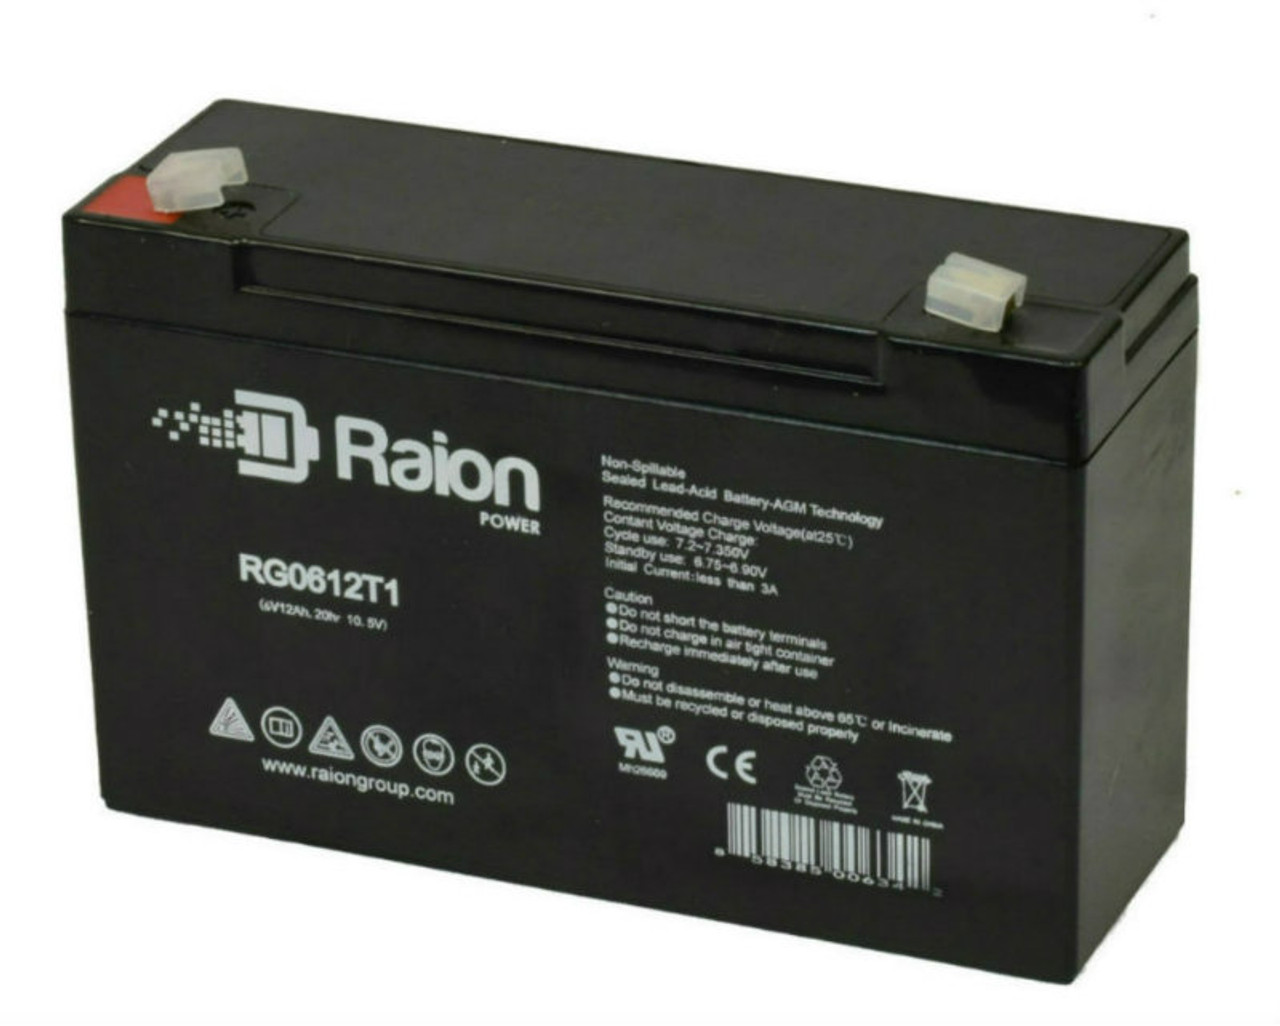 Raion Power RG06120T1 Replacement Battery for Ultracell UL10-6